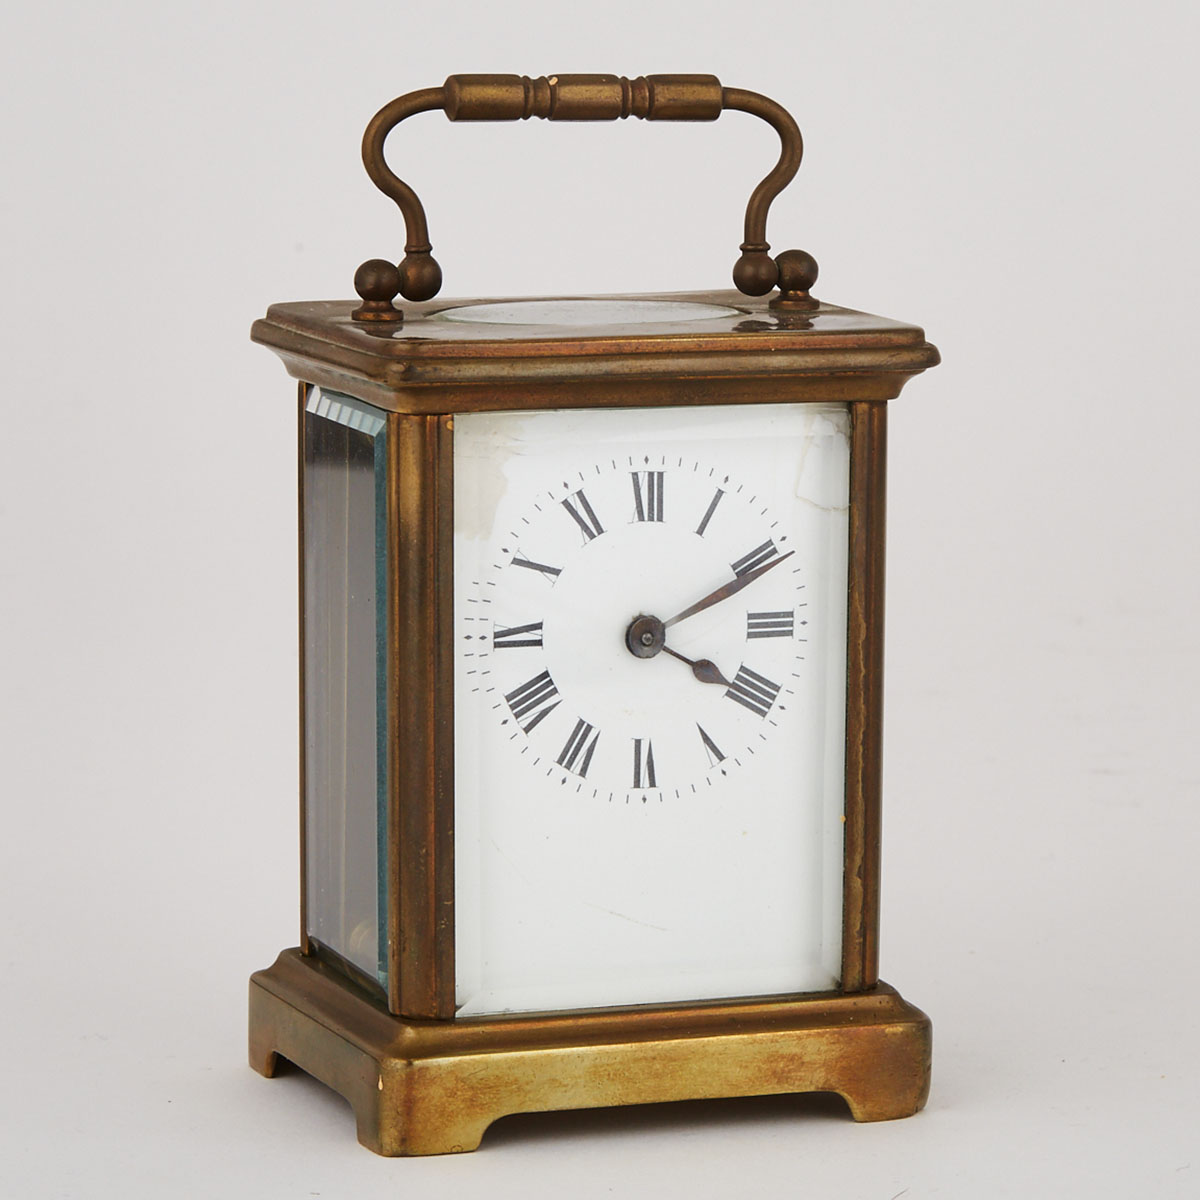 French Carriage Clock, late 19th century